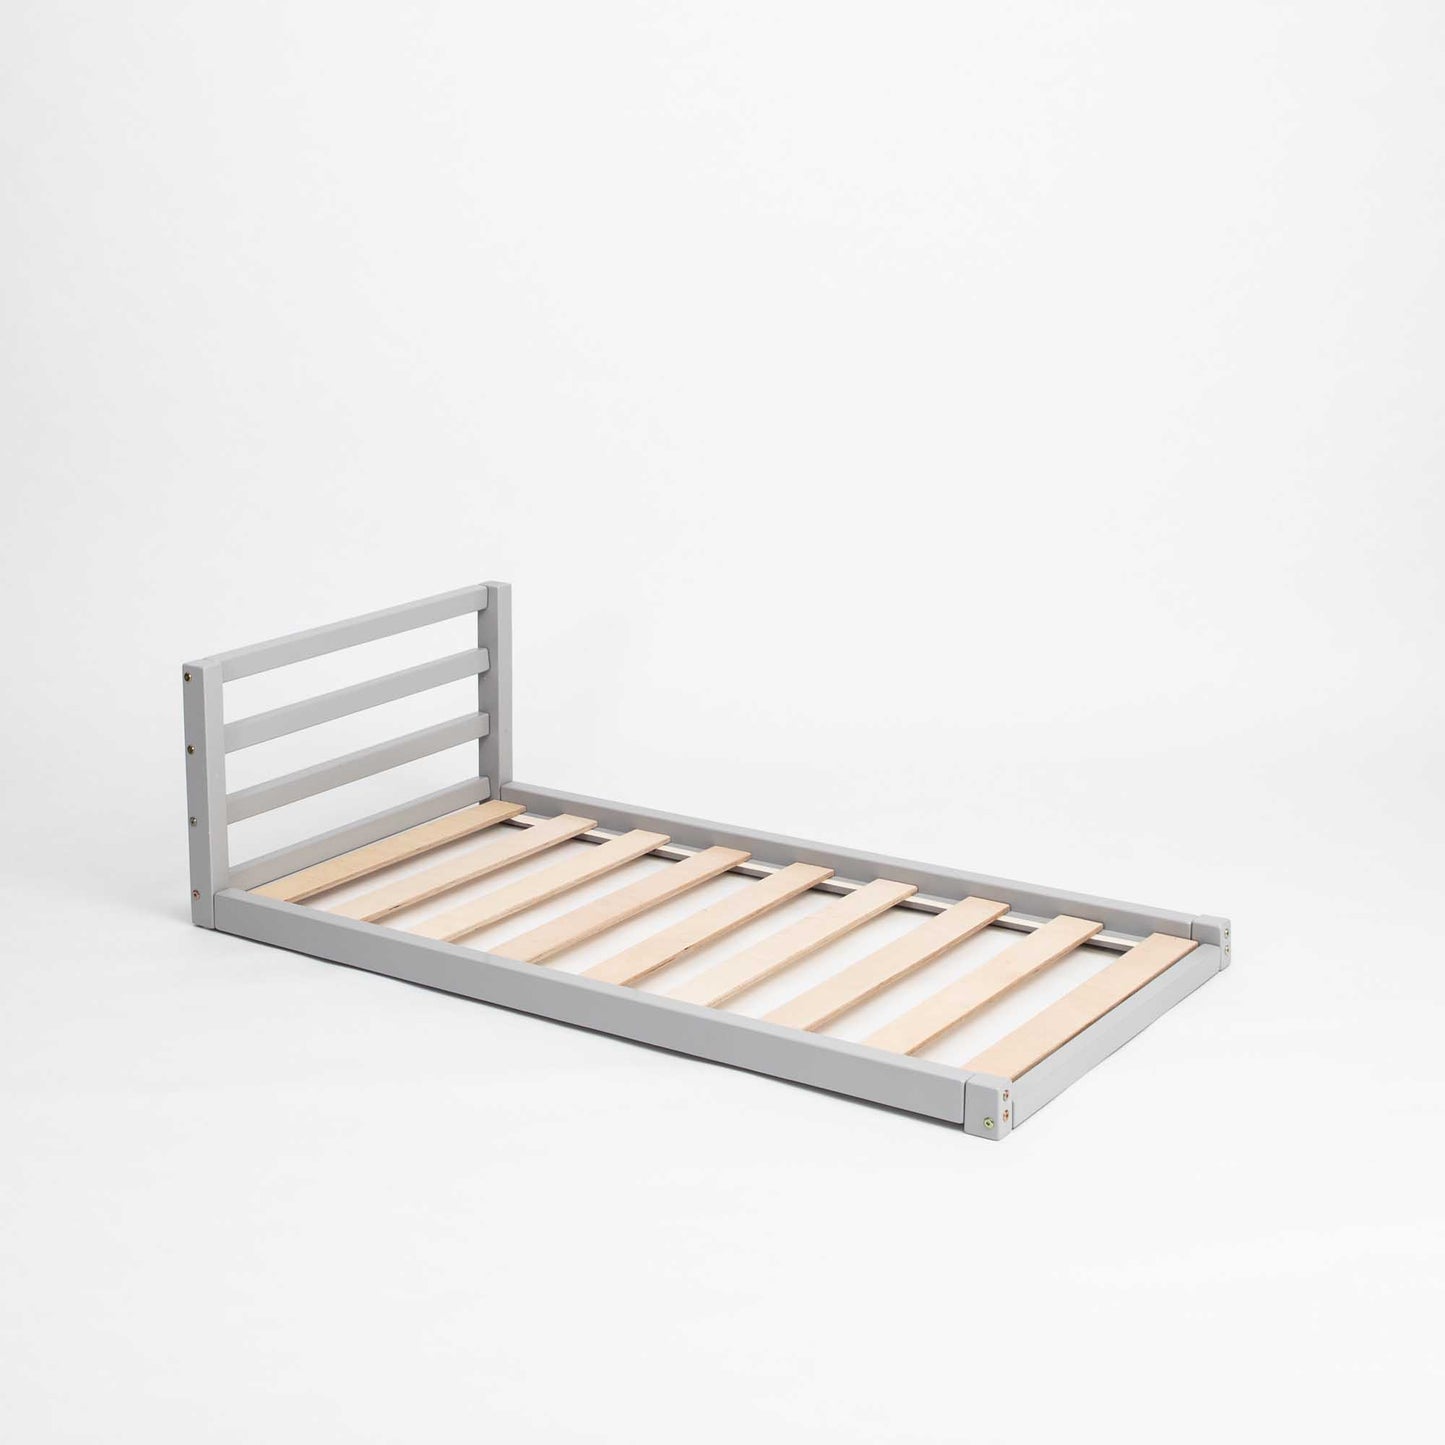 A Sweet Home From Wood Toddler floor bed with a horizontal rail headboard and wooden slats on a white background.